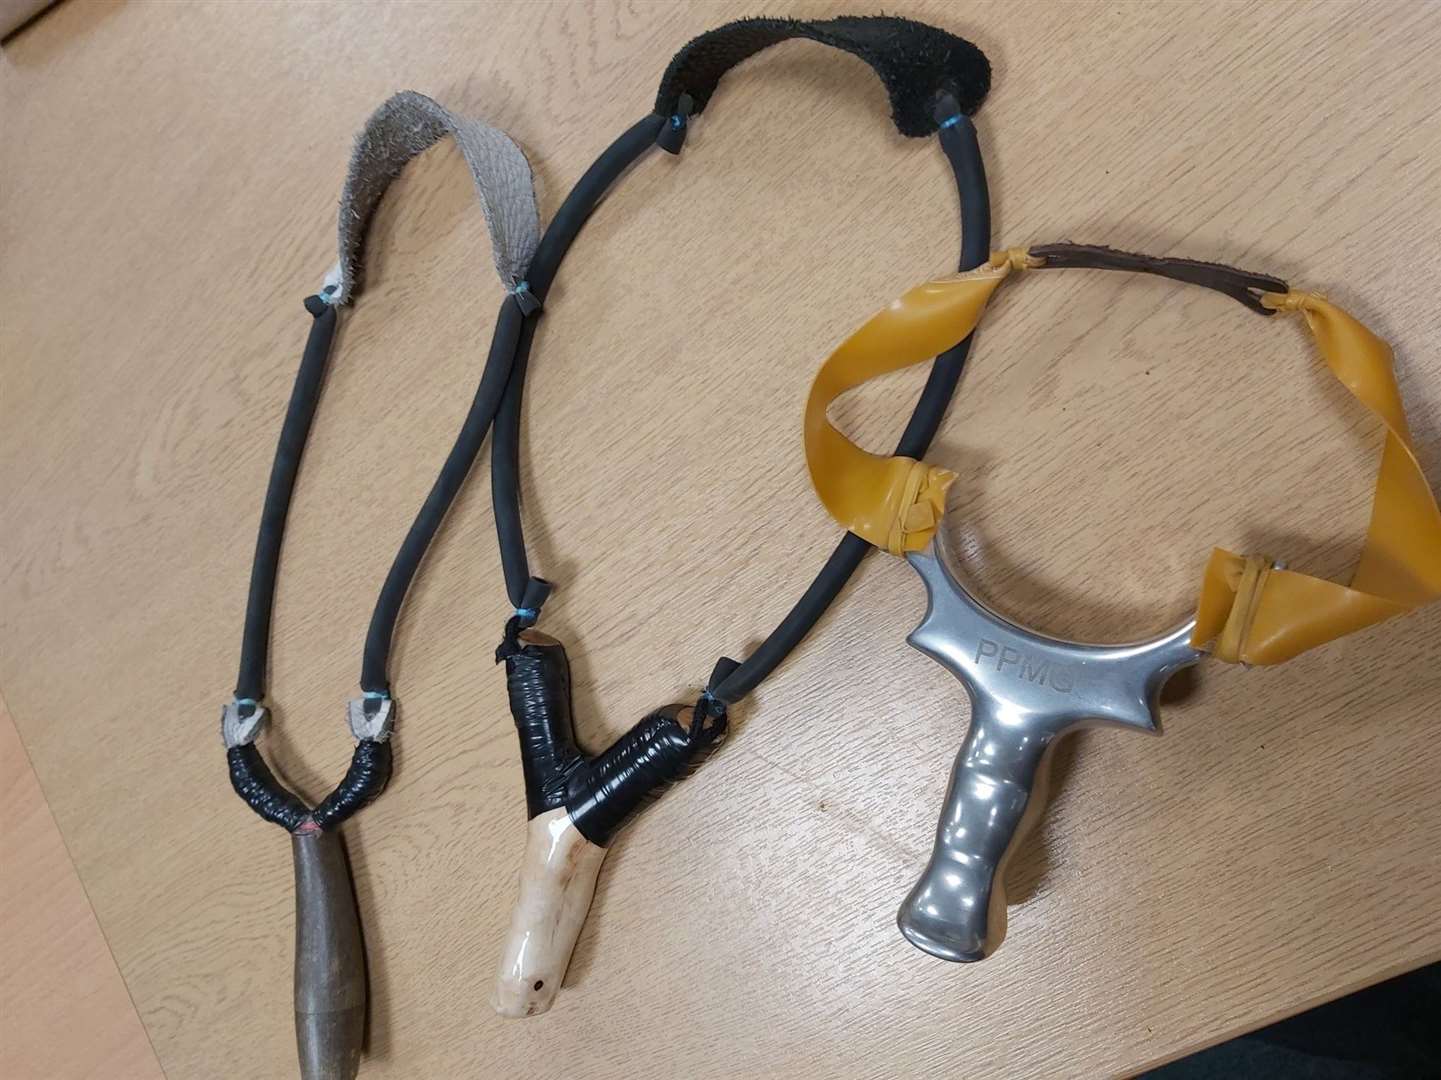 Three catapults were seized by police in Maidstone. Picture: @kentpolicemaid